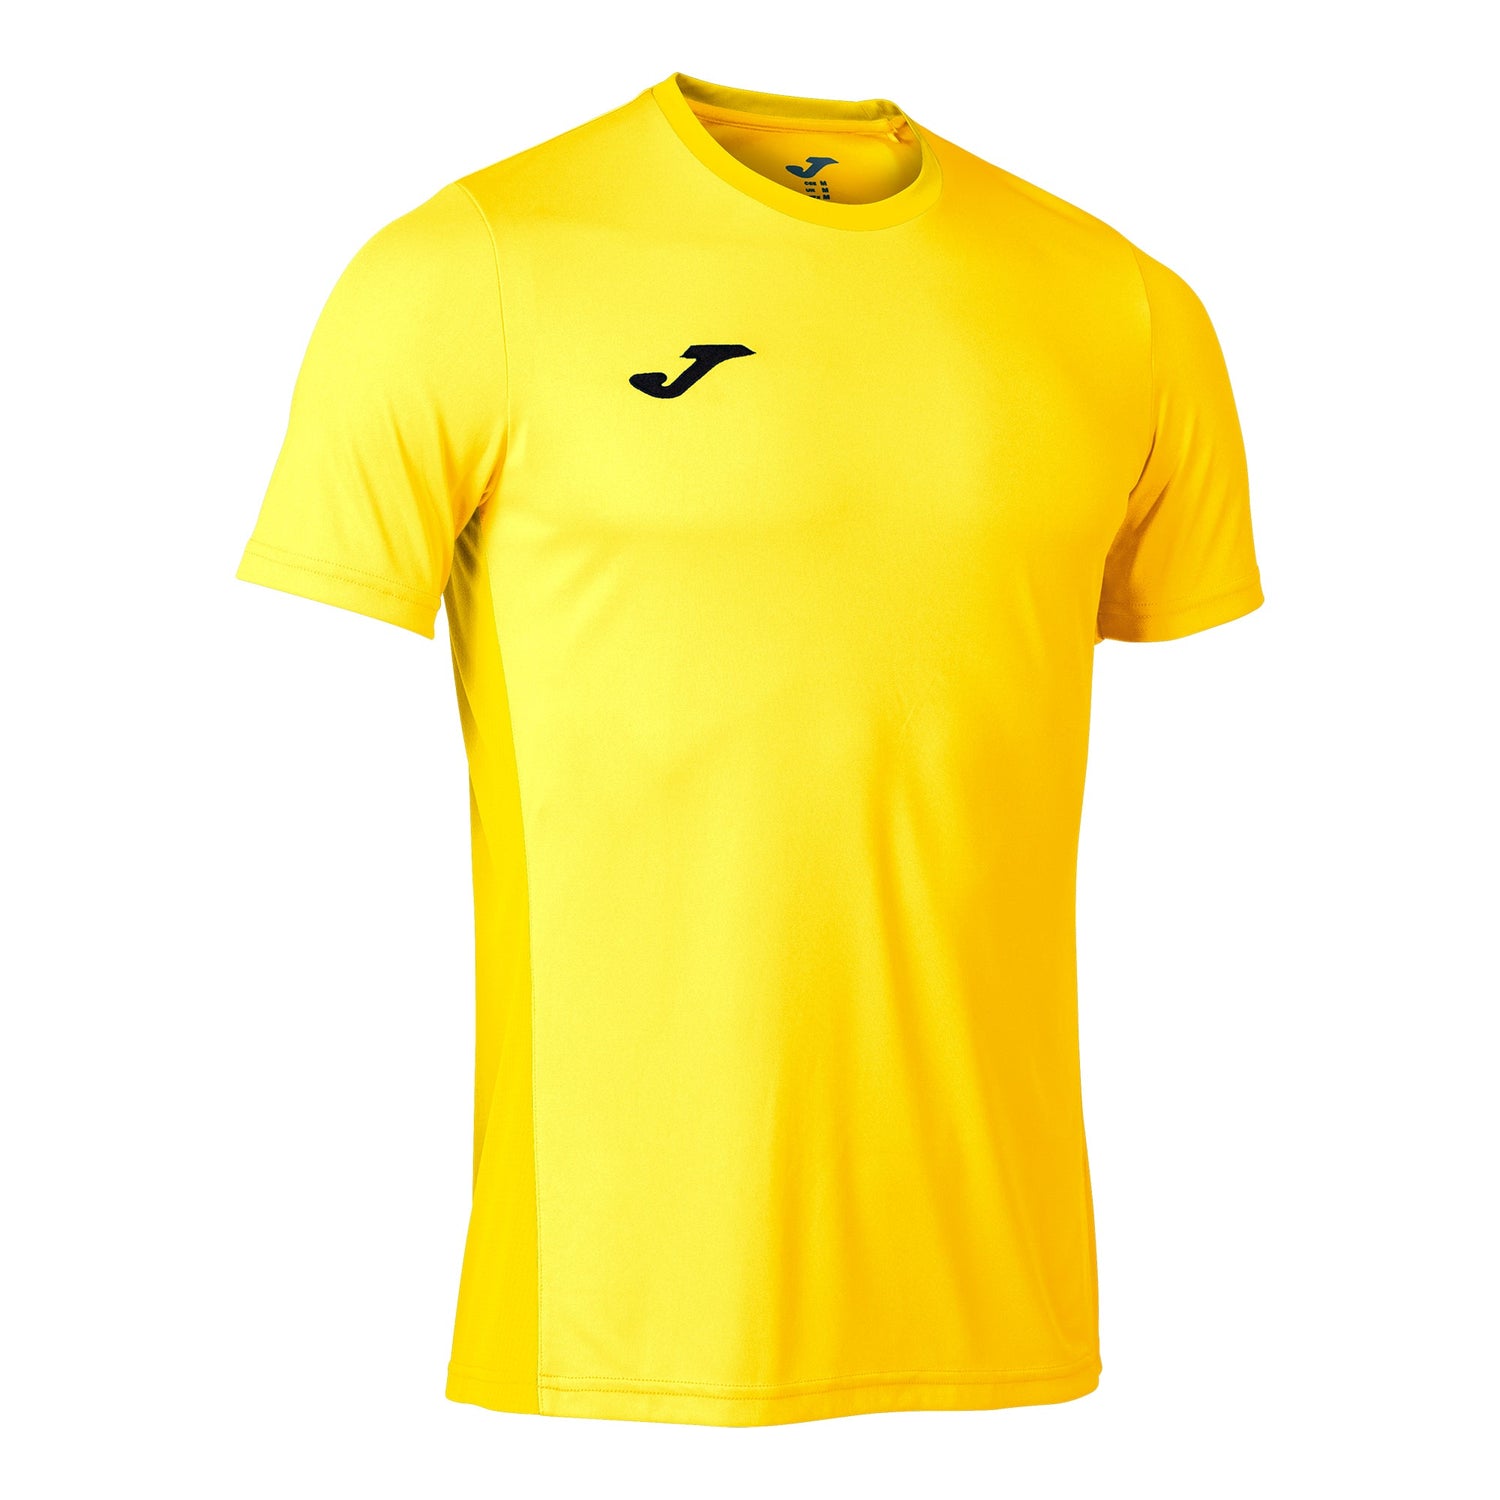 Joma Soccer Jersey available in Joma Canada Store. Customize your teamwear with sponsors and numbers. Joma is shipping in Canada. For club offers contact us.